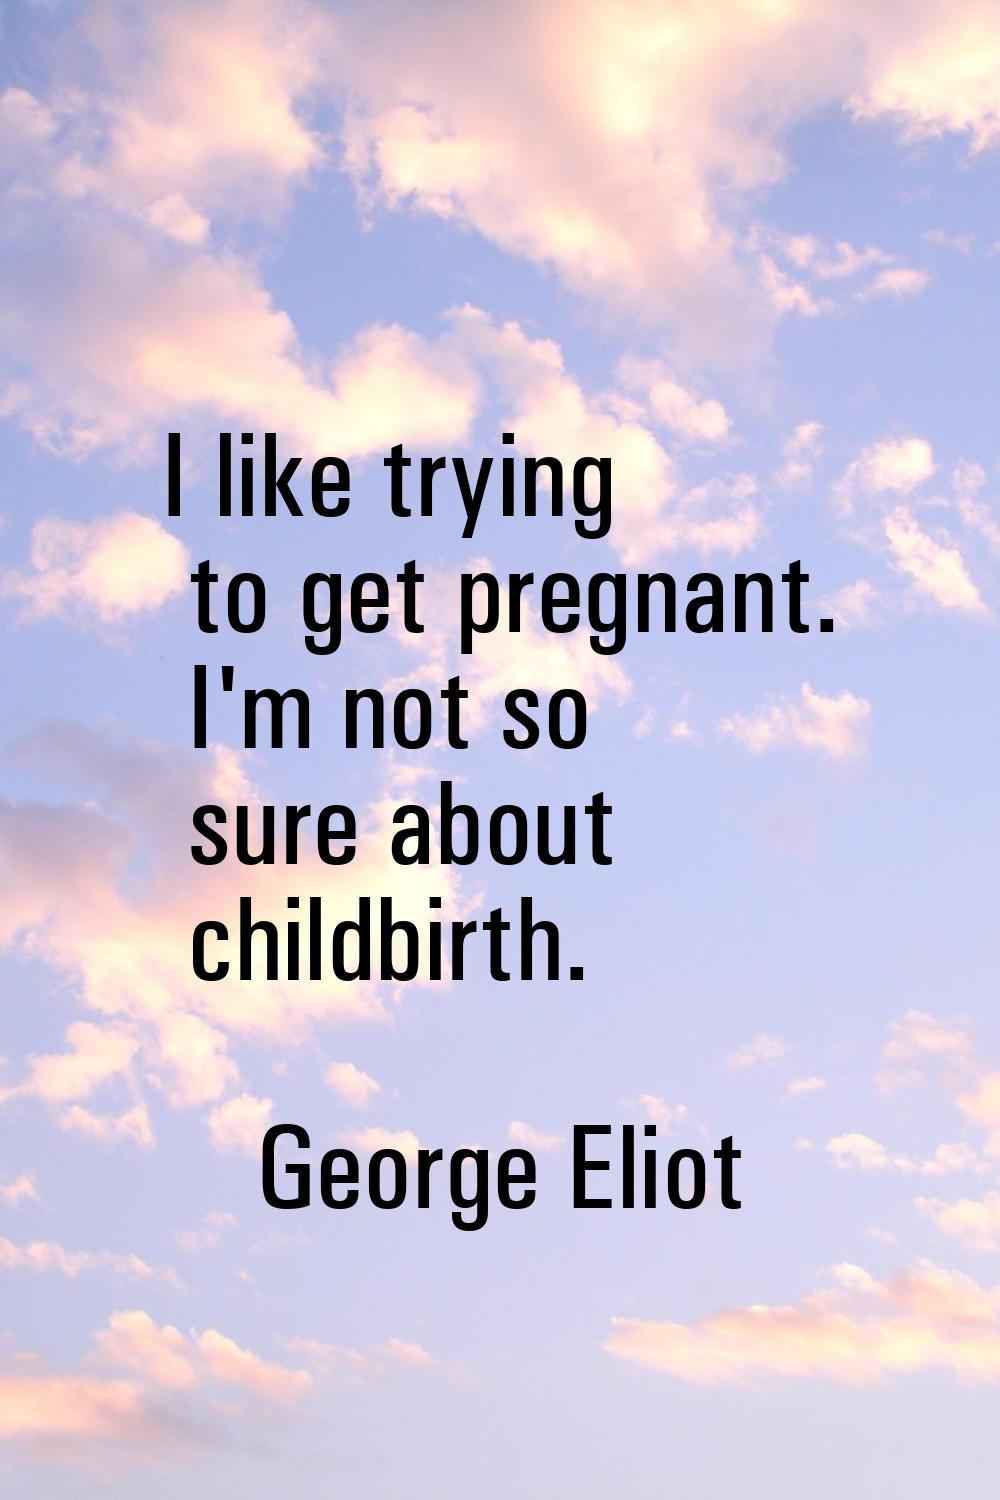 I like trying to get pregnant. I'm not so sure about childbirth.